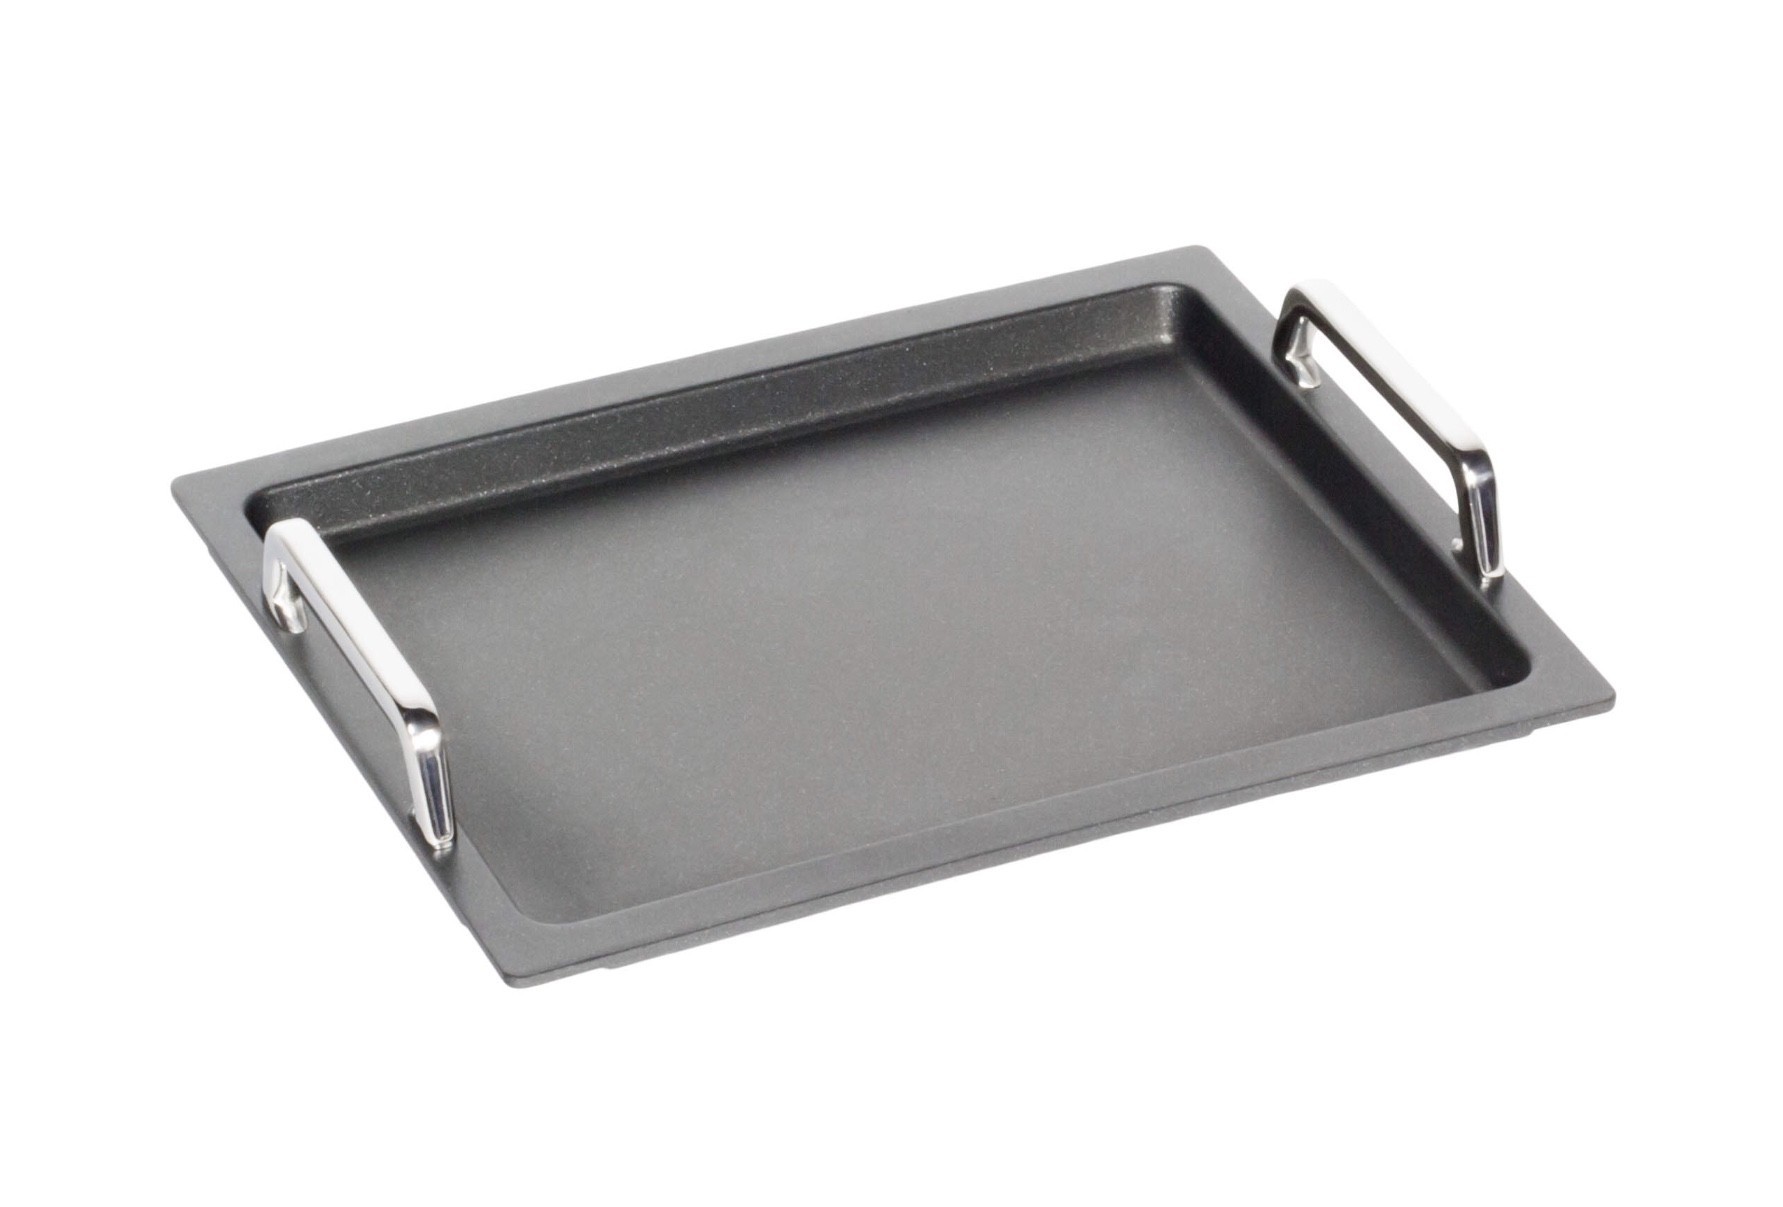 Buy AMT Flat grill plate online at smithsofloughton.com